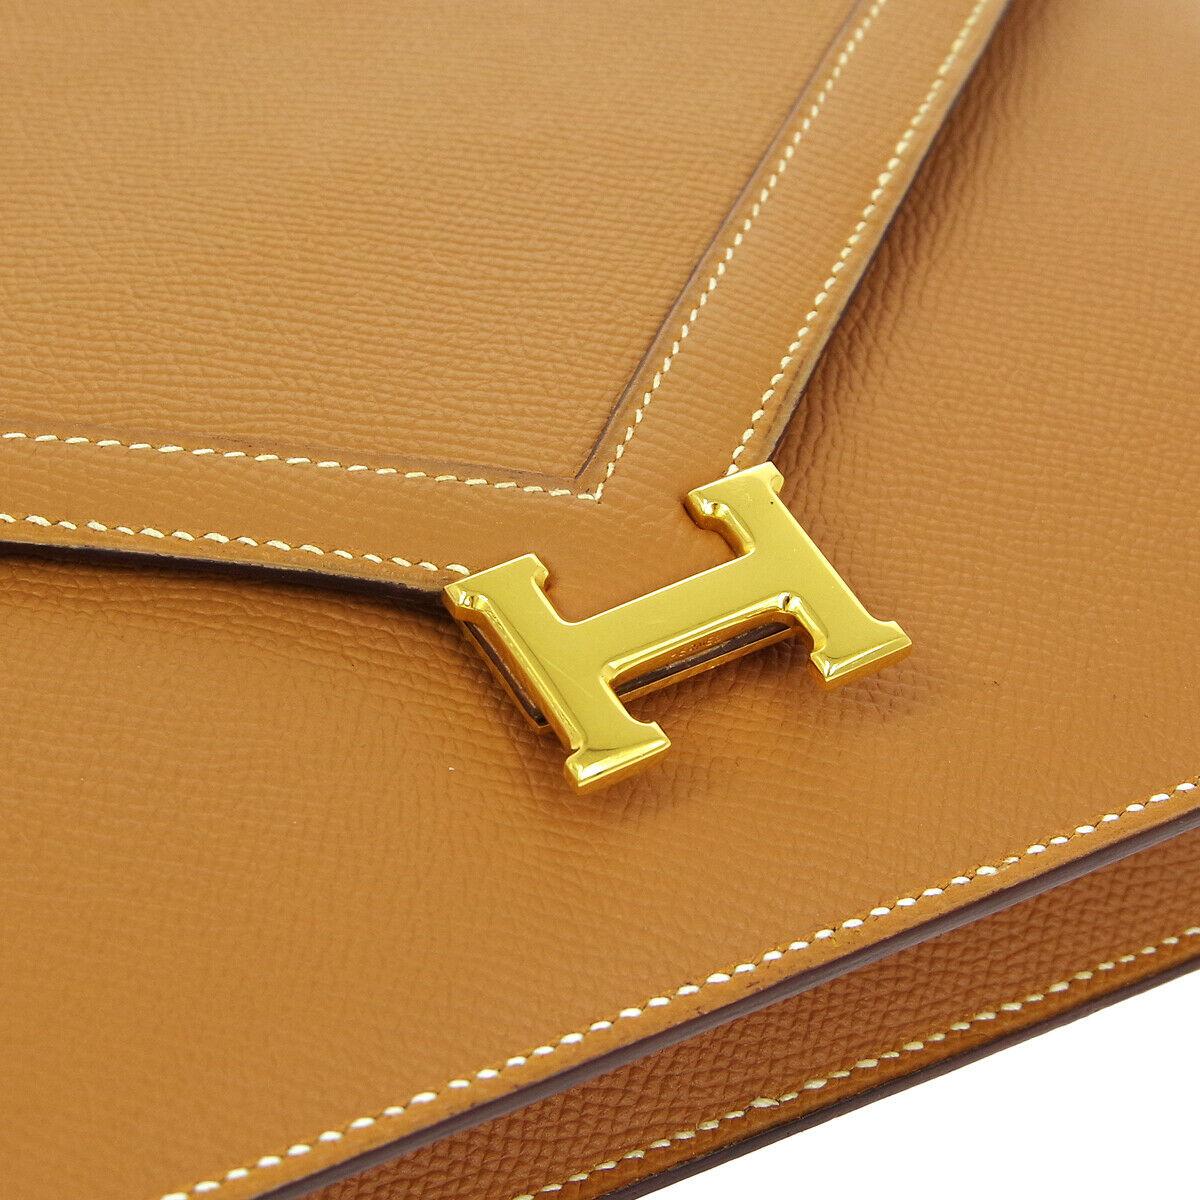 
Leather
Gold tone hardware
Leather lining
Snap closure
Date code present
Made in France
Shoulder strap drop 15